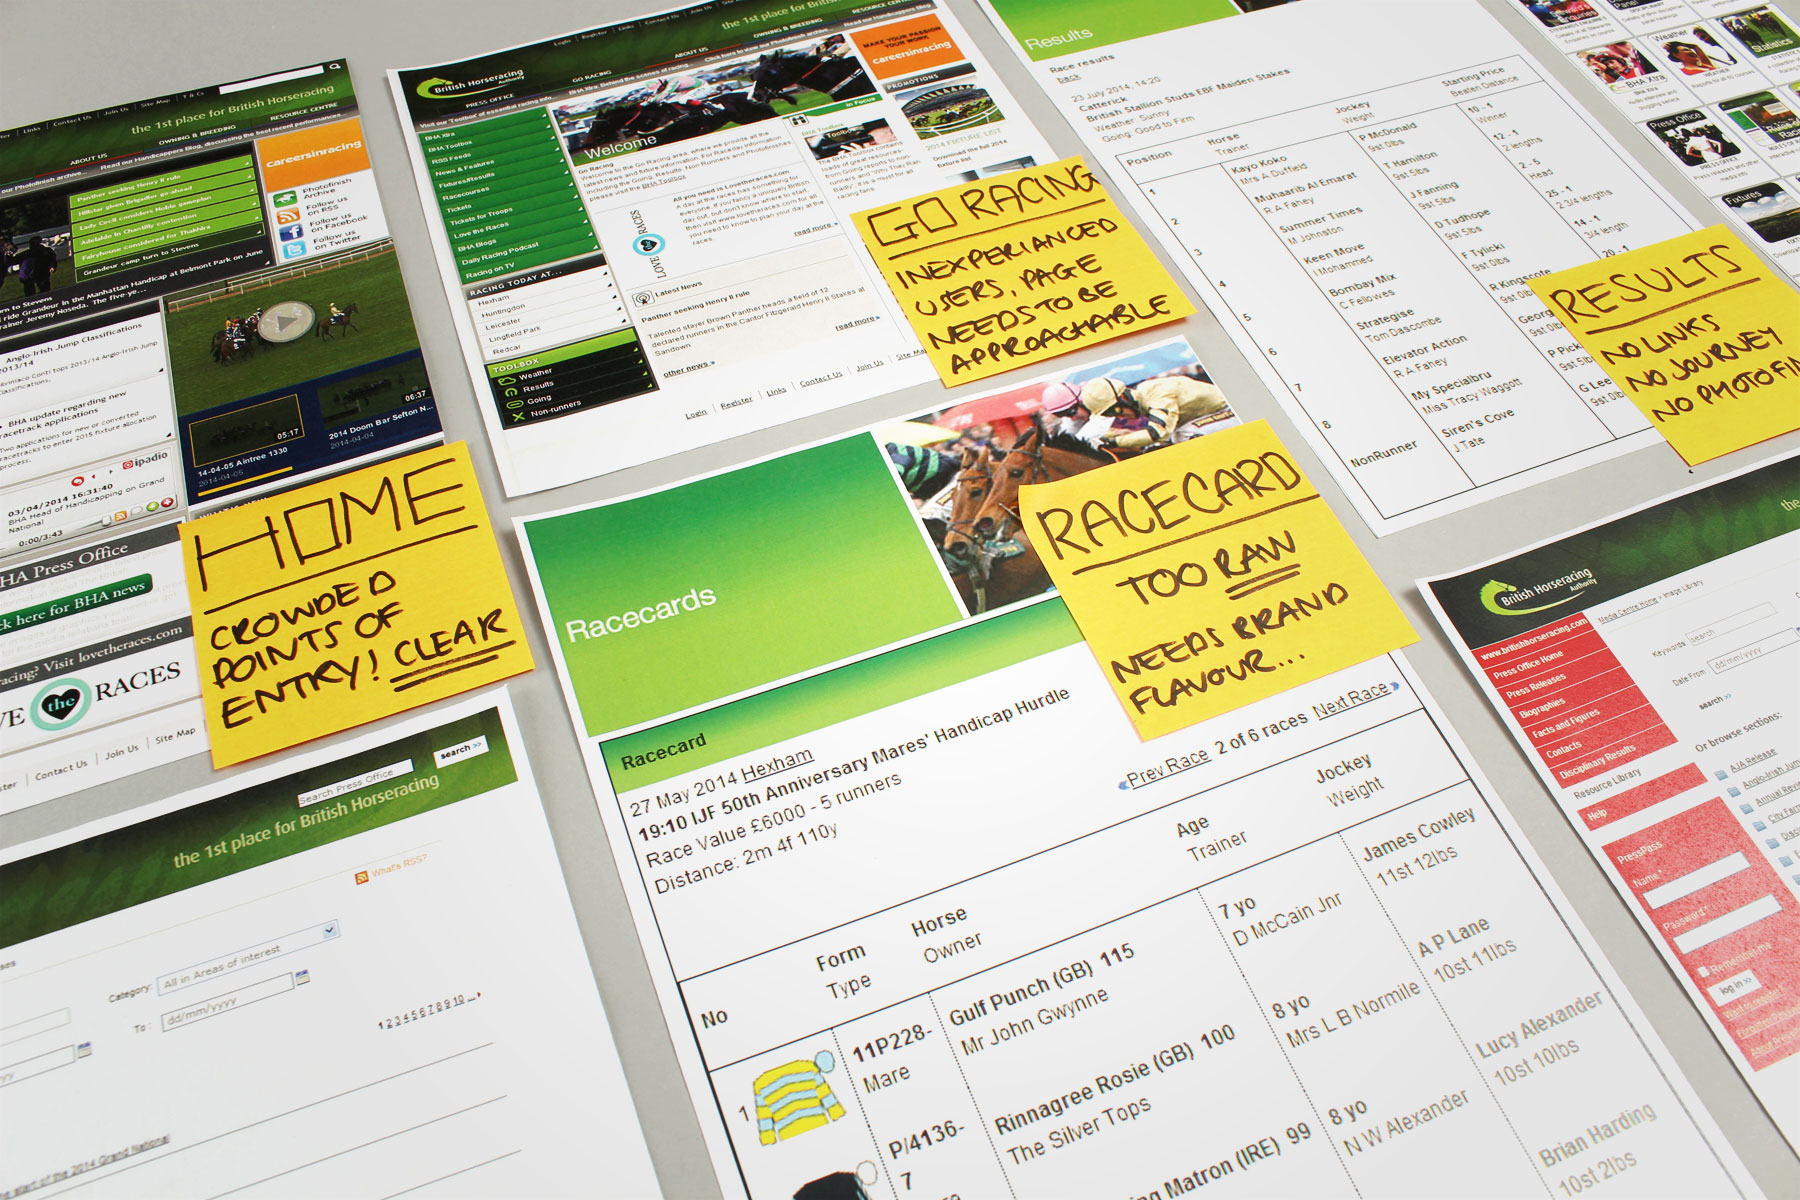 An initial audit was carried out across the BHA website. This included UI/UX, navigation and aesthetics.